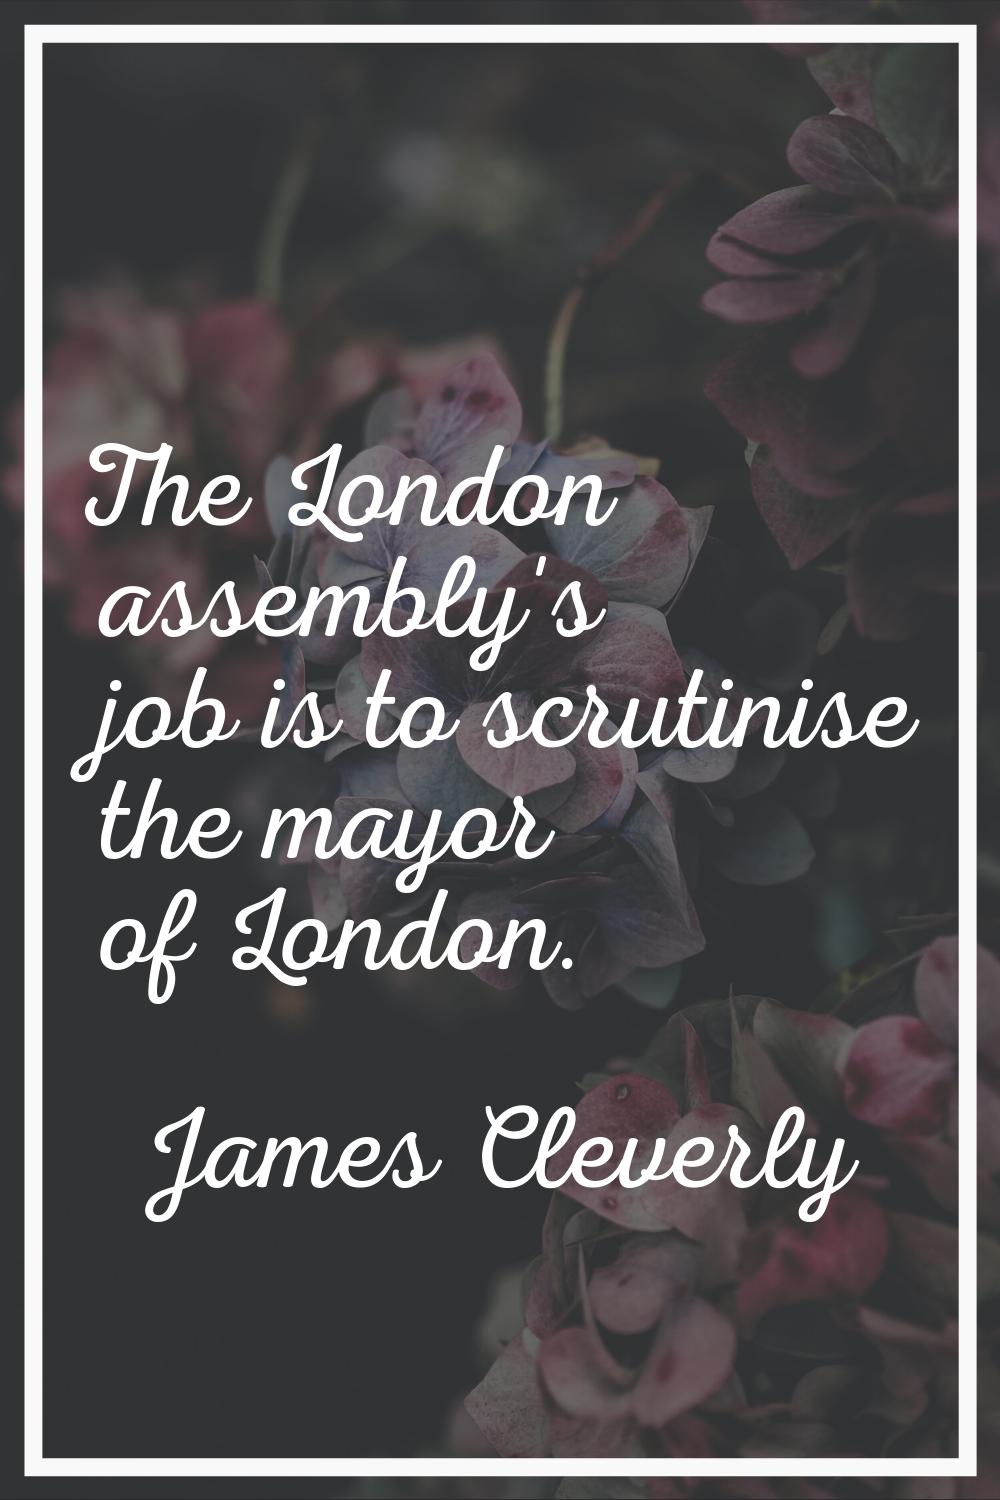 The London assembly's job is to scrutinise the mayor of London.